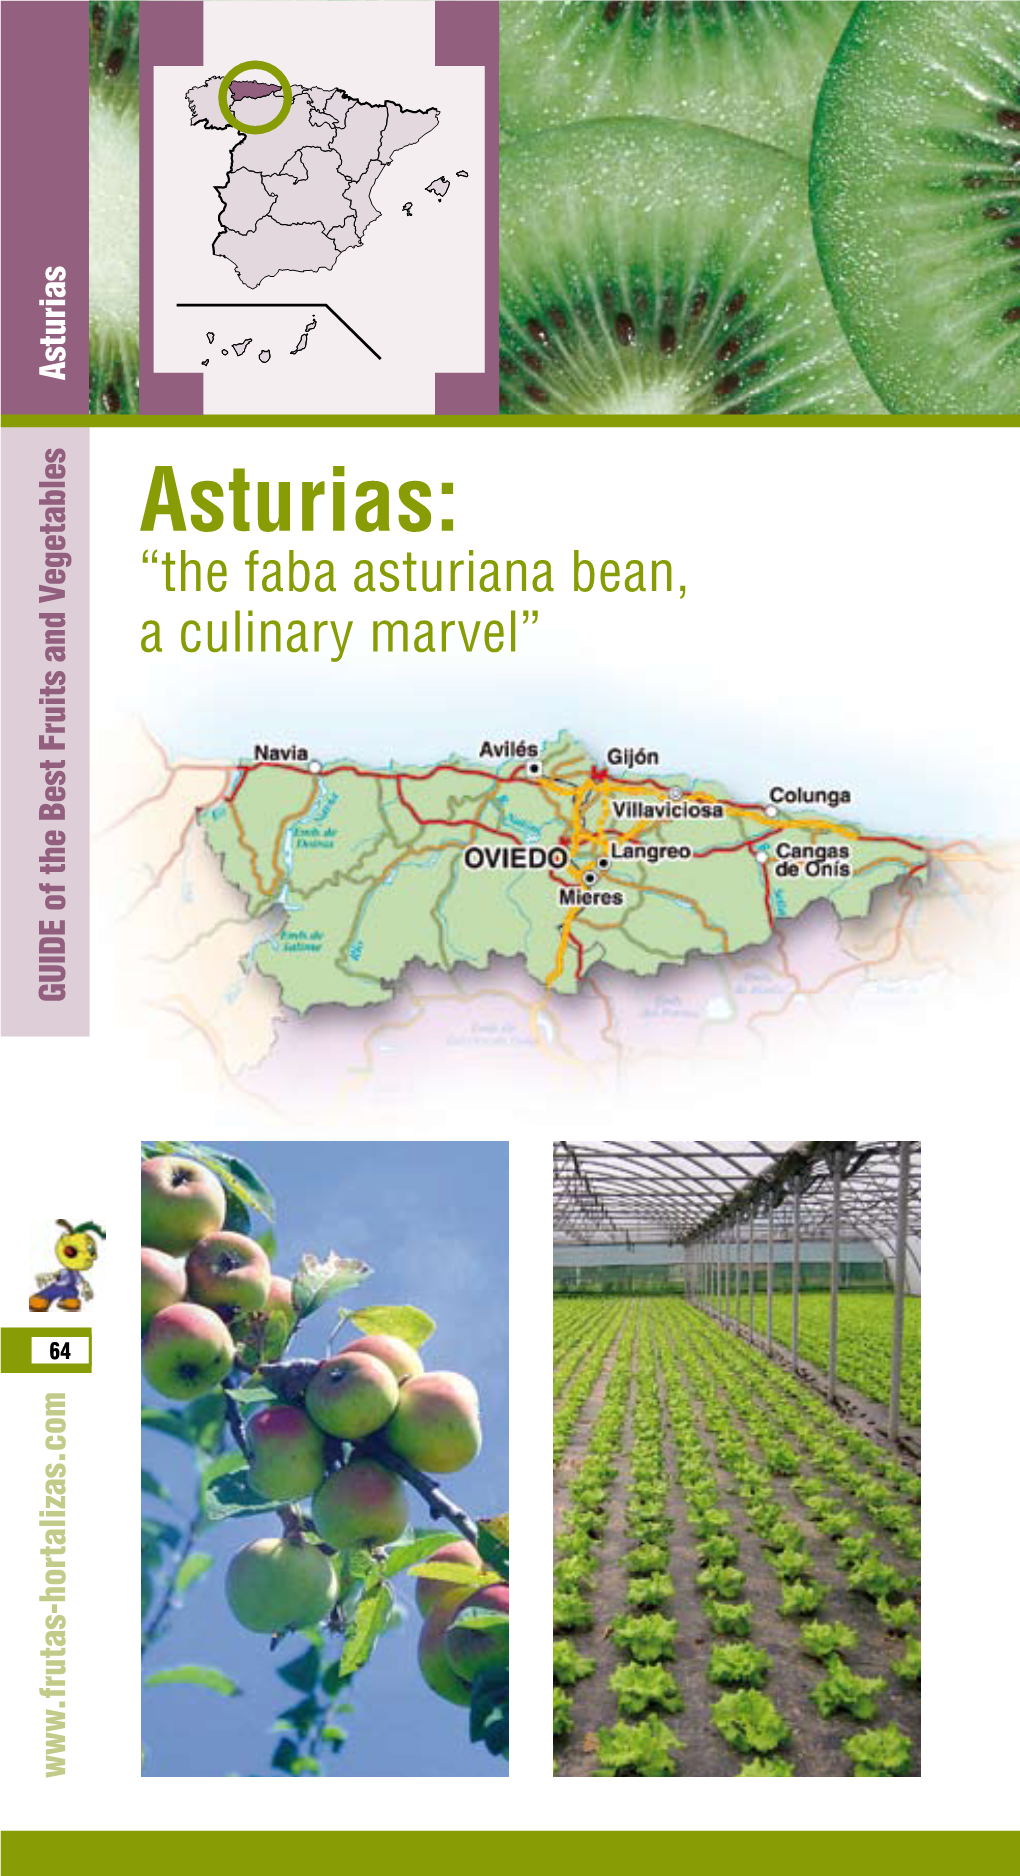 Asturias: “The Faba Asturiana Bean, a Culinary Marvel” GUIDE of the Best Fruits and Vegetables